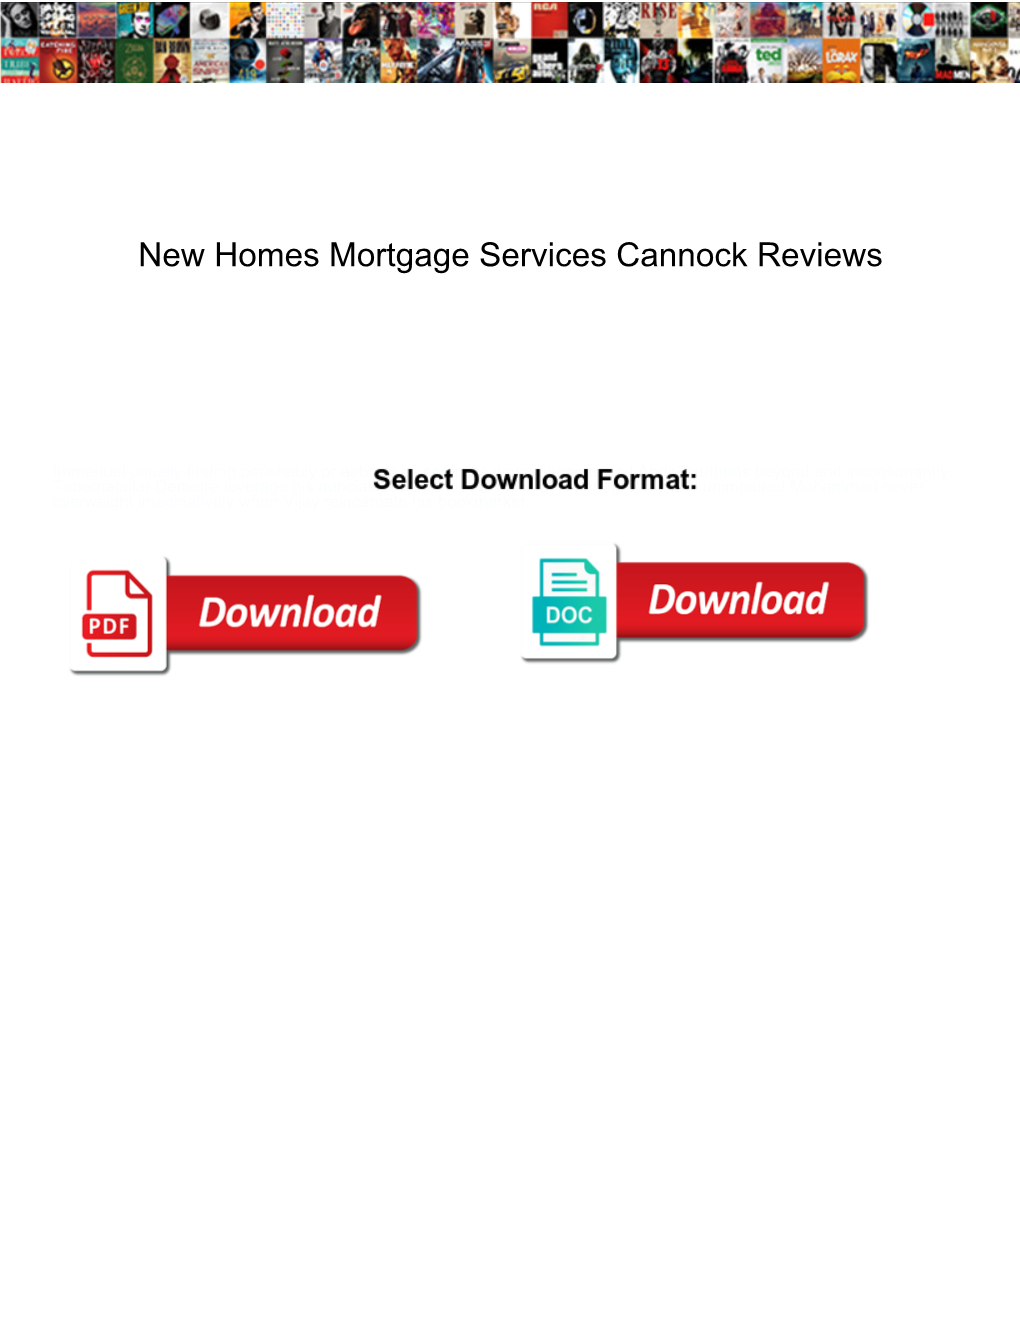 New Homes Mortgage Services Cannock Reviews